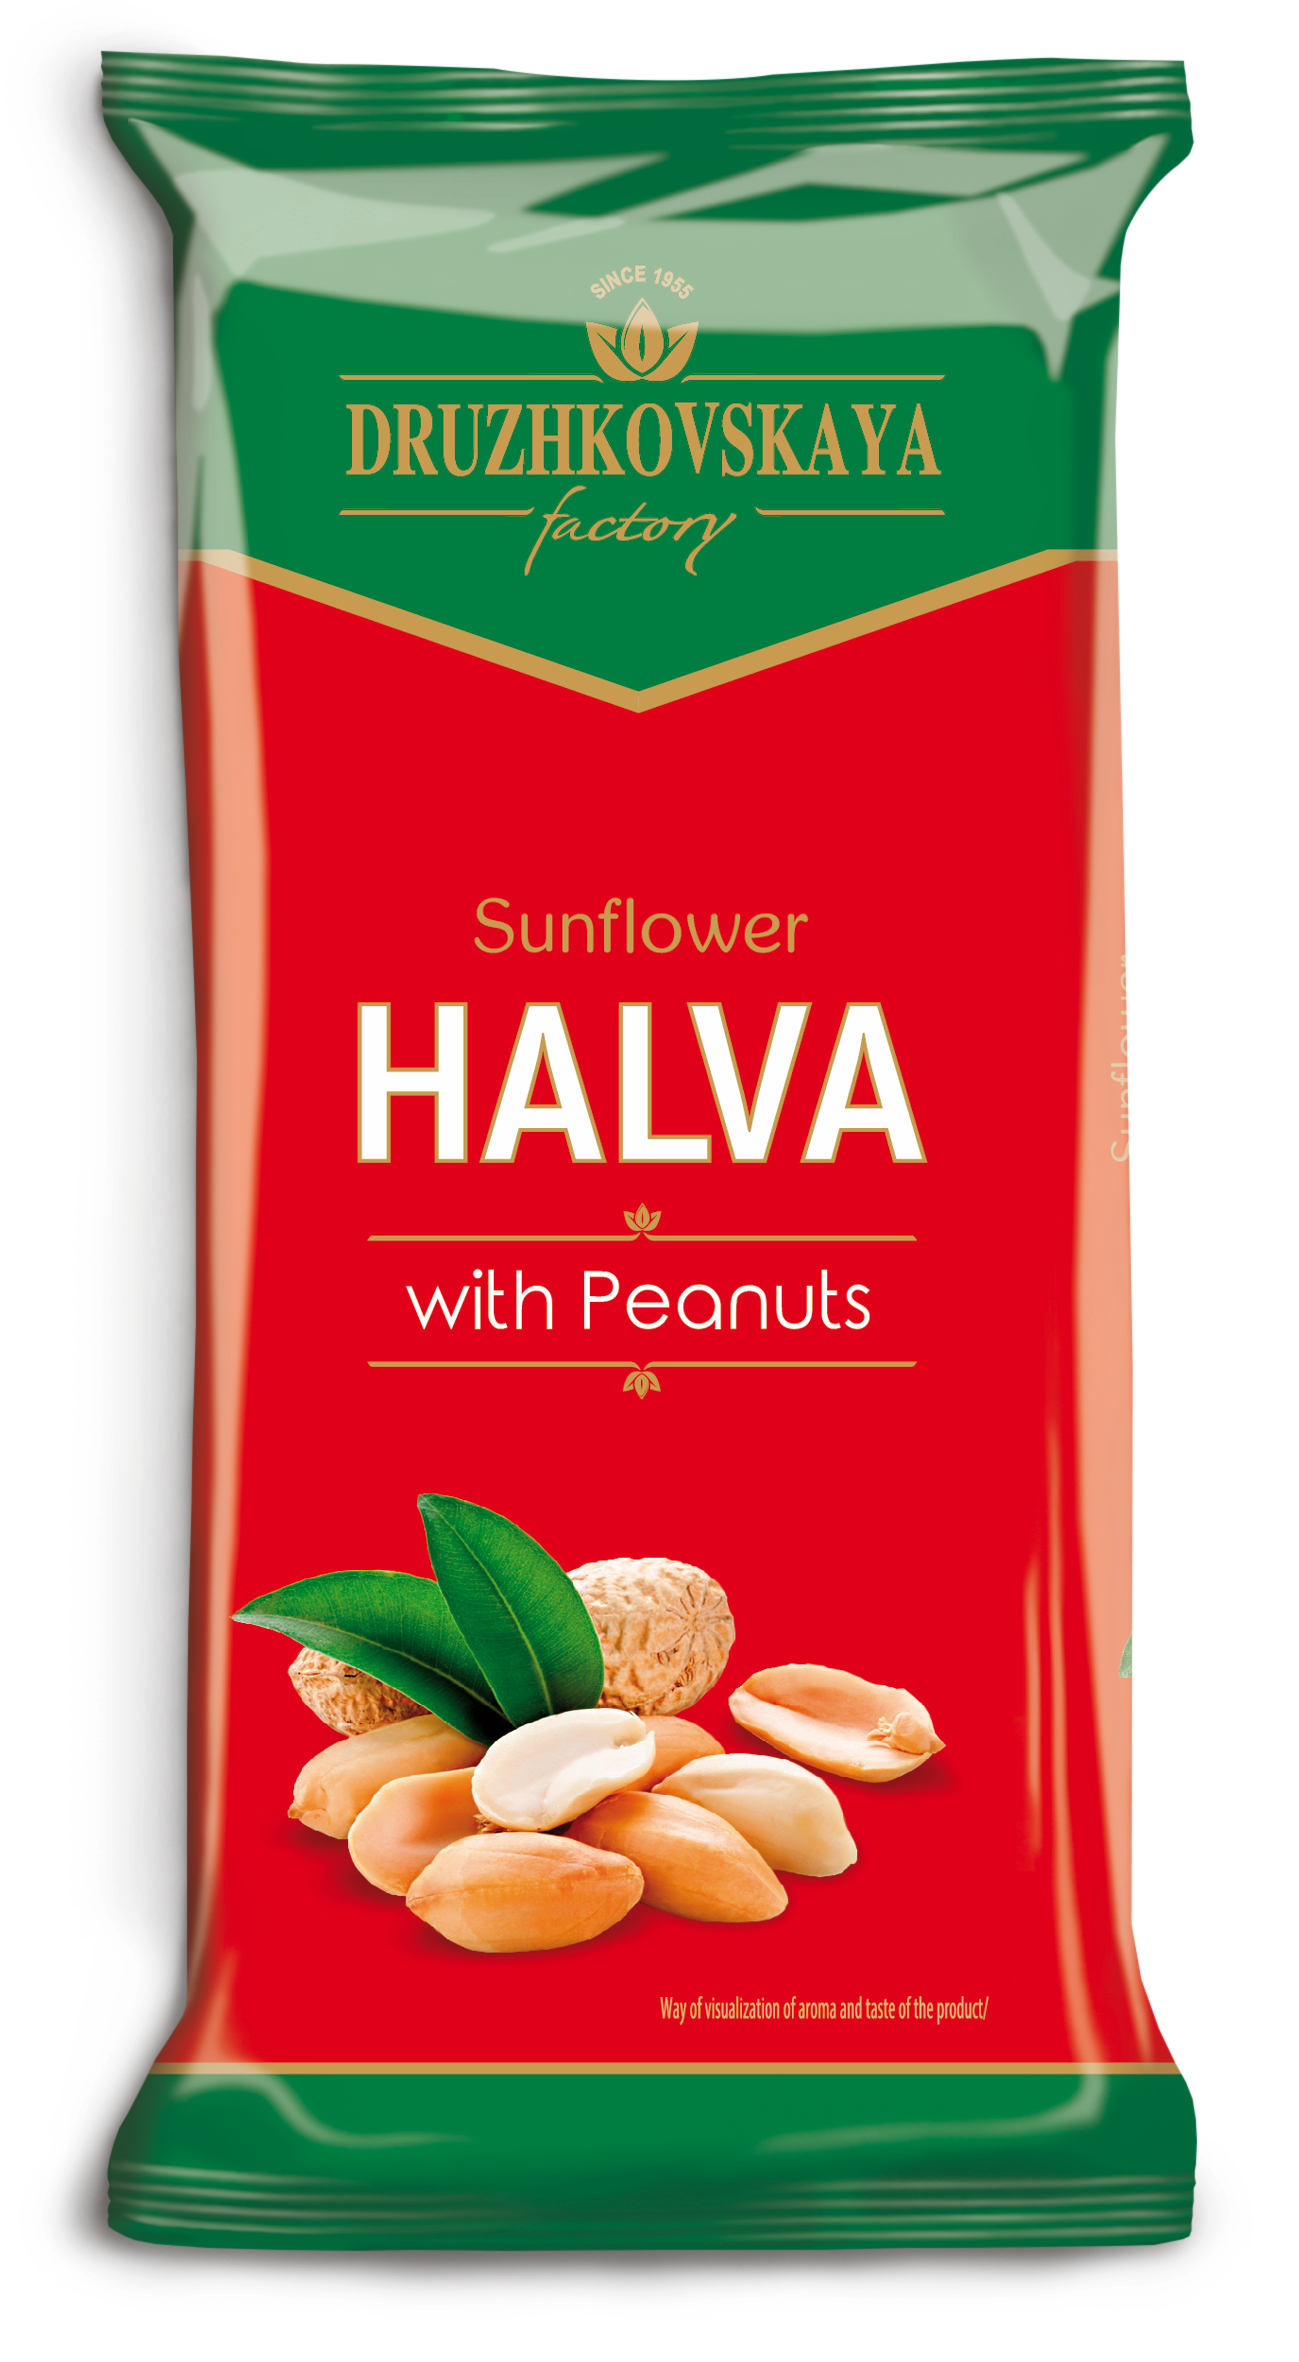 Sunflower Halva with Peanuts Packed in Flow-pack, 350 g